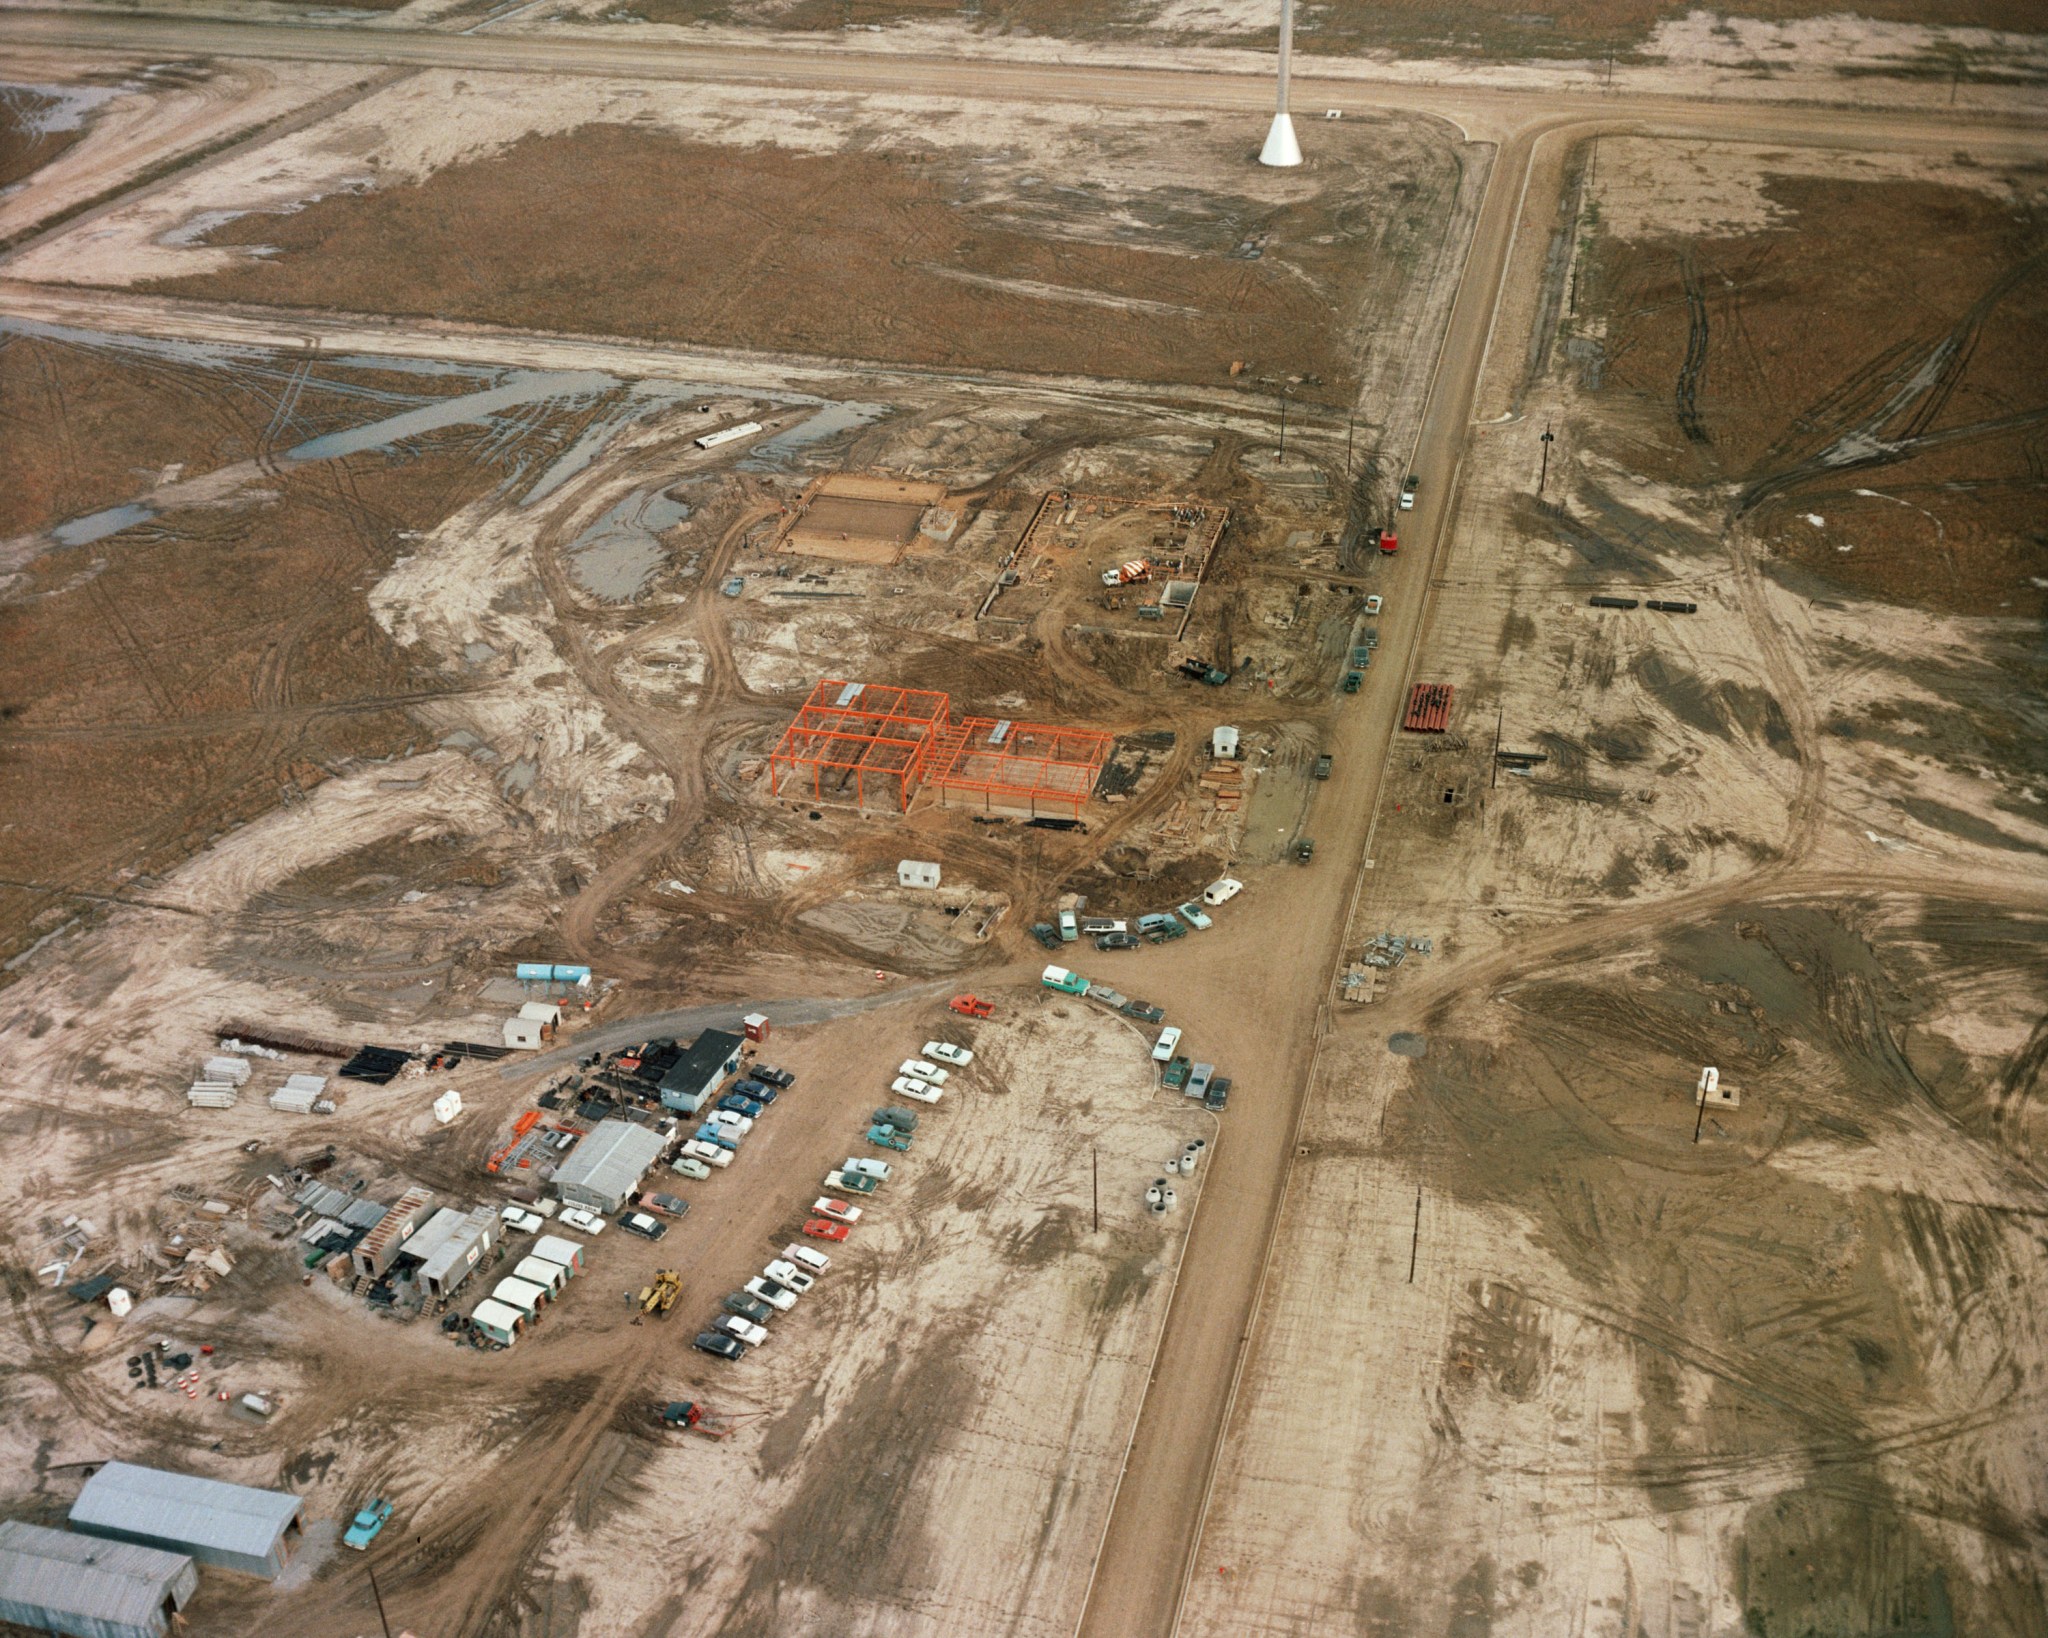 Aerial view of the Manned Spacecraft Center grounds on January 9, 1963 while under construction.